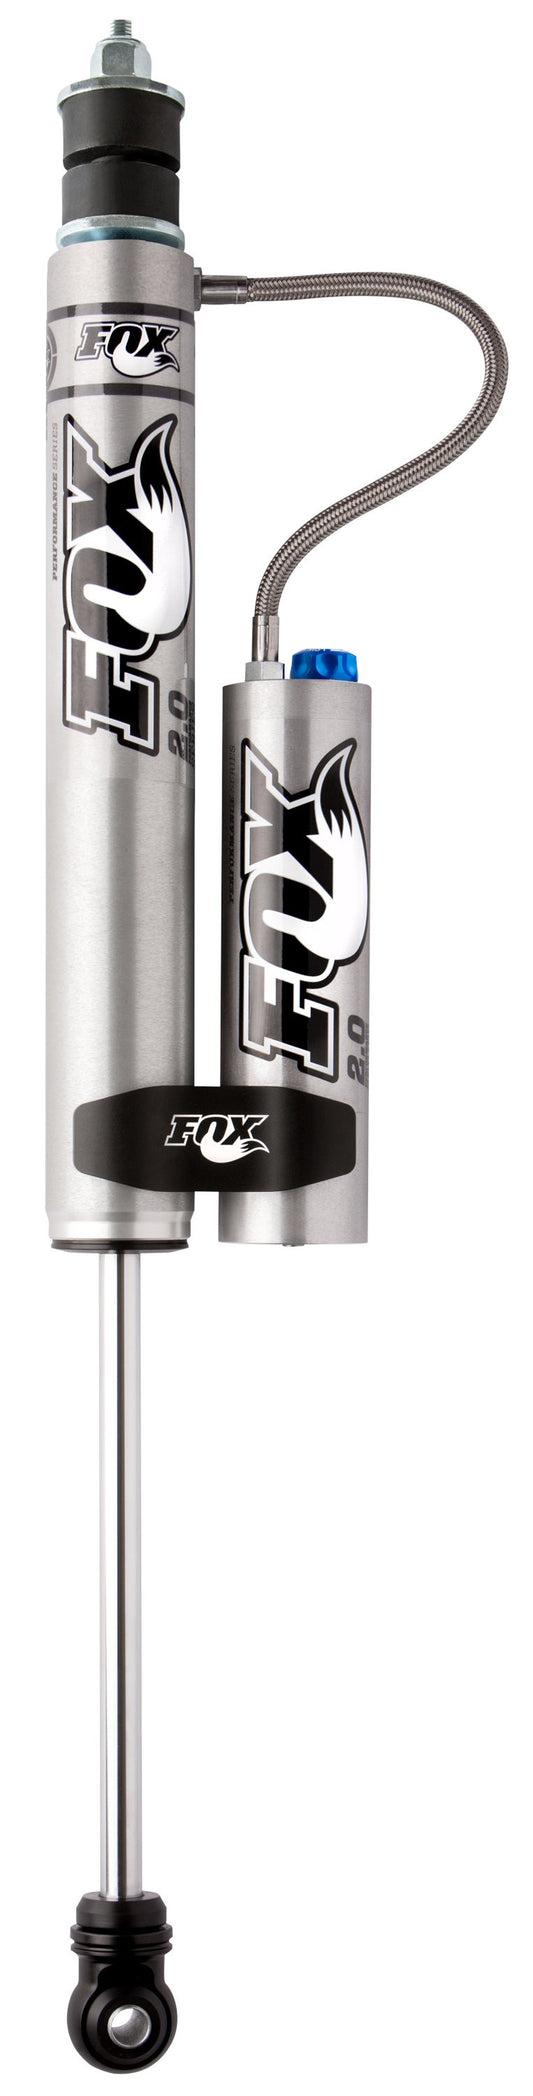 PERFORMANCE SERIES 2.0 SMOOTH BODY RESERVOIR SHOCK - ADJUSTABLE Lift: 4-6; Includes Billet Reservoir Clamp I Does not fit magnetic suspension 2011-2019 GMC Sierra 2500 HD FOX-980-26-966 - 2.0 SHOCK - FOX Offroad Shocks - Texas Complete Truck Center